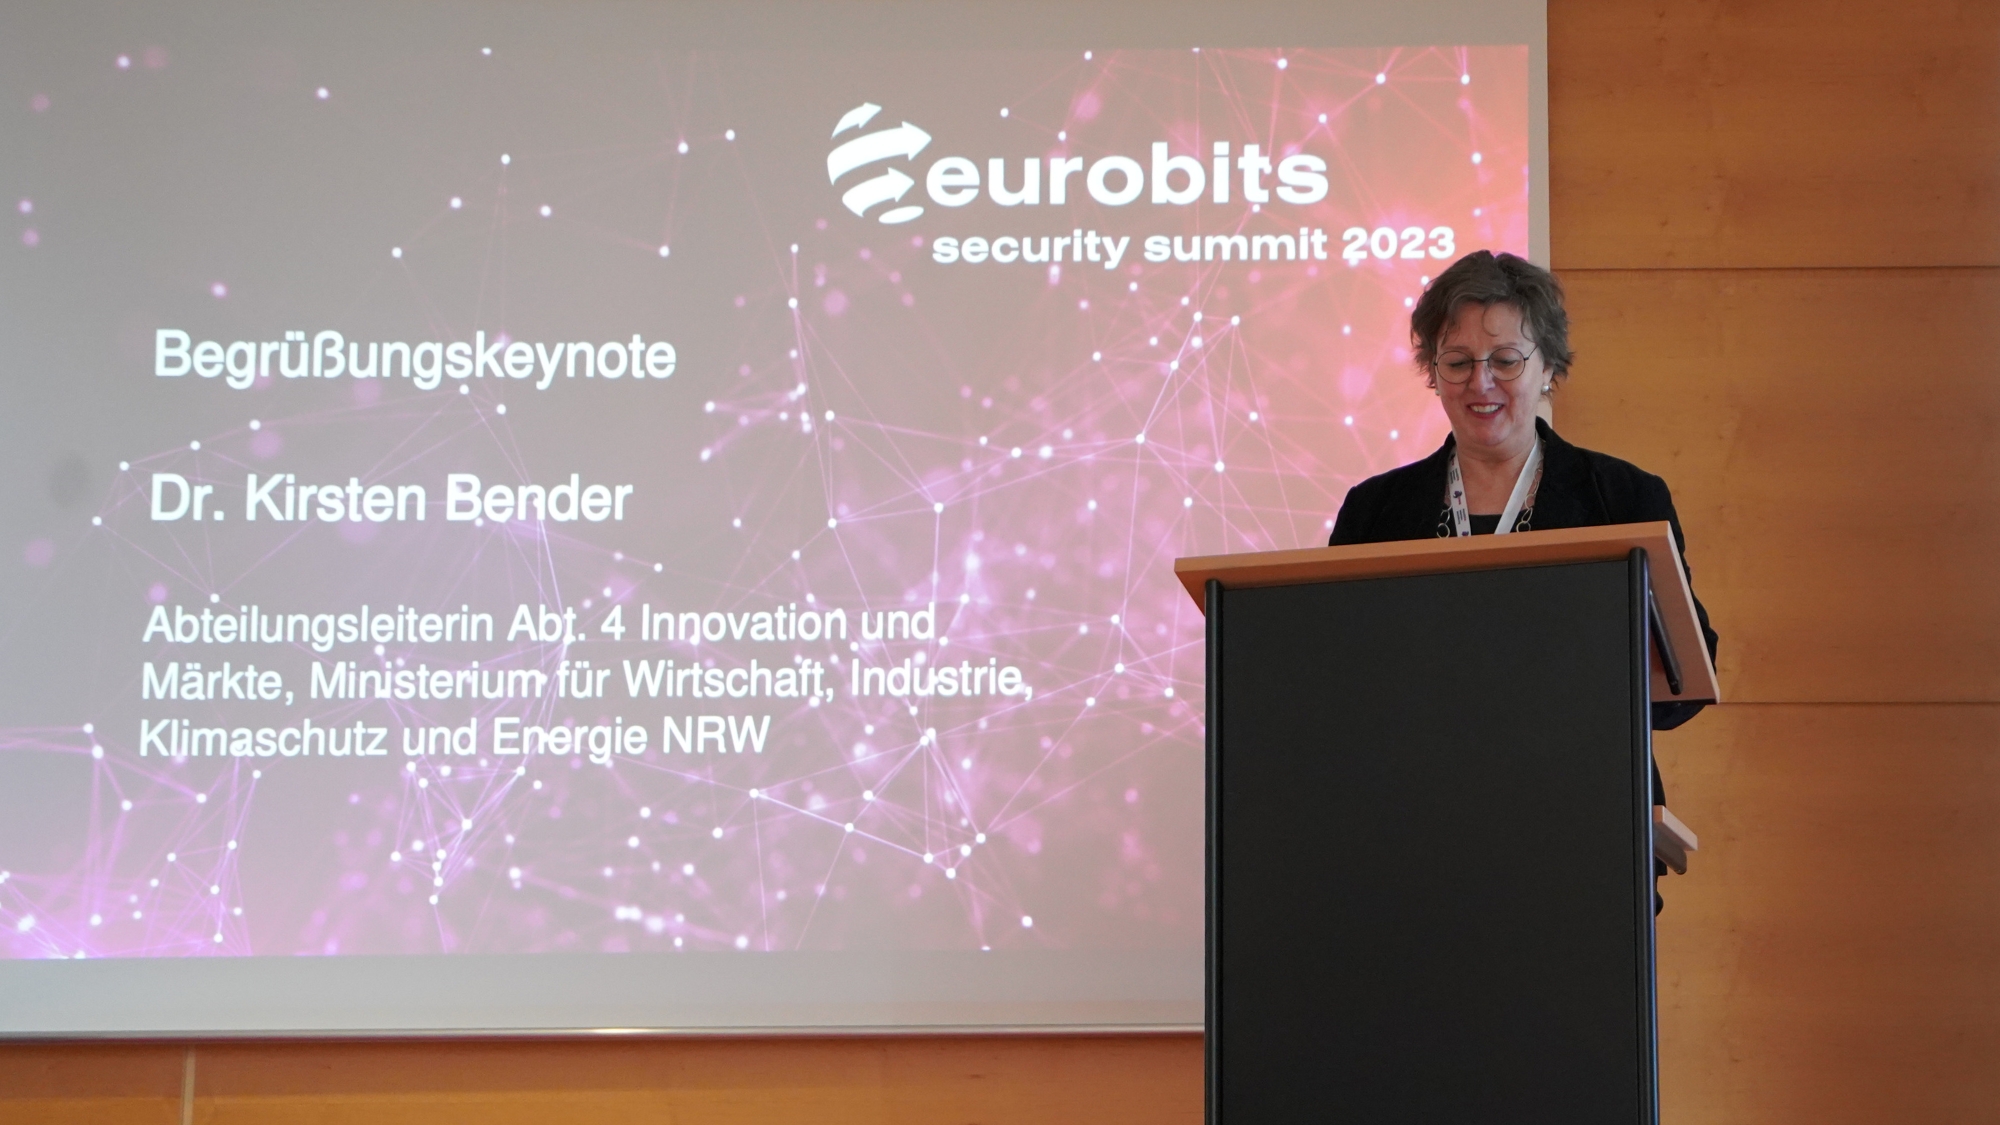 So war unser eurobits security summit 2023